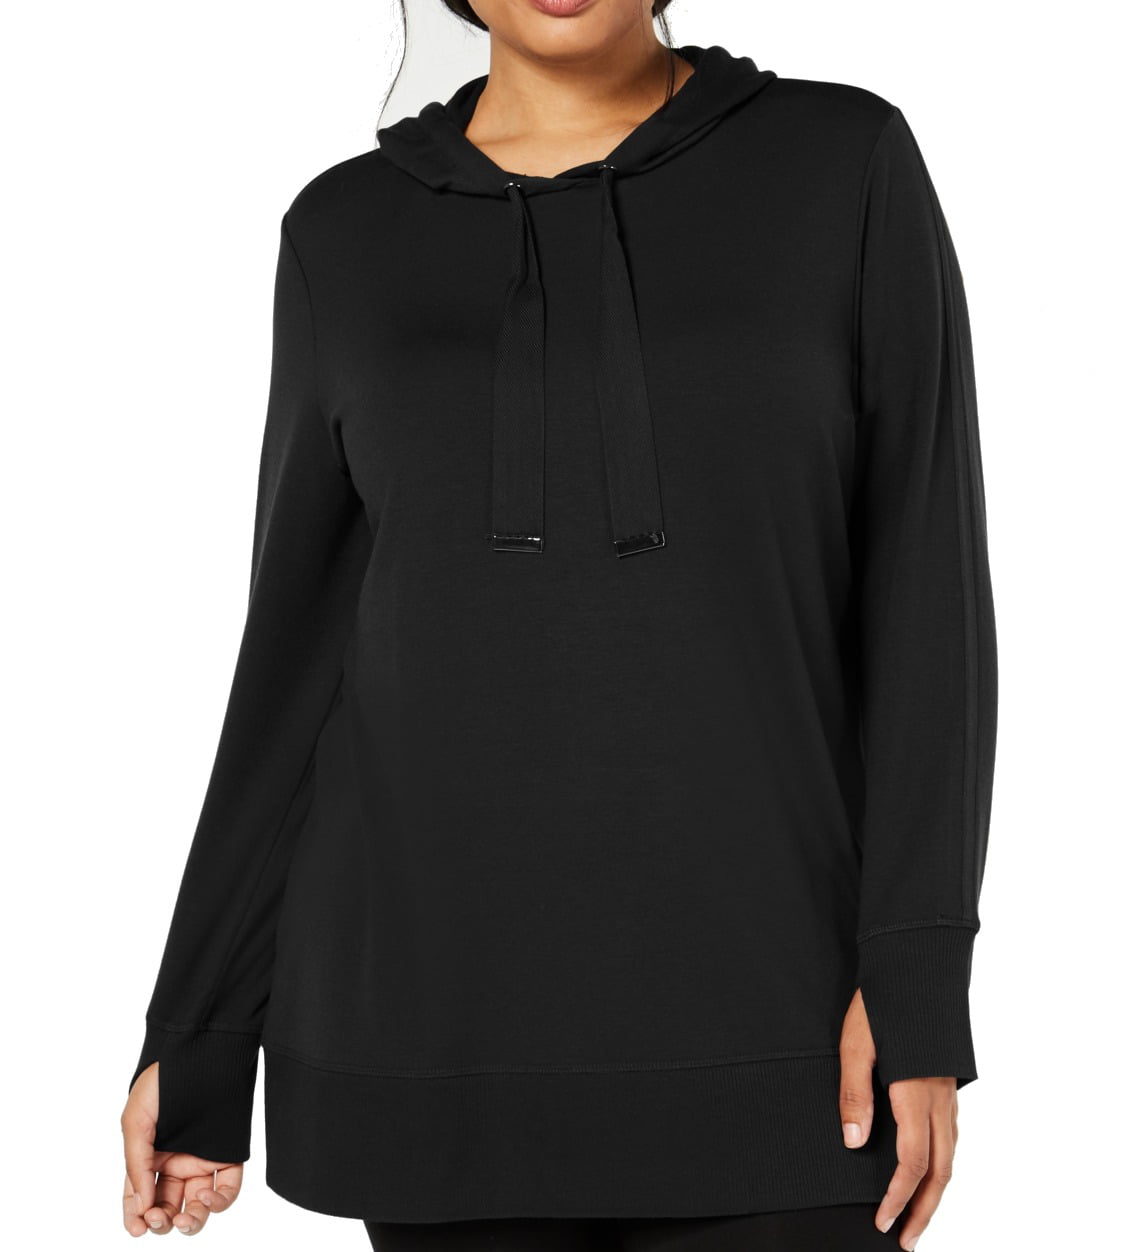 Ideology - Womens Pullover Plus Activewear Hooded Ribbed $54 1X ...